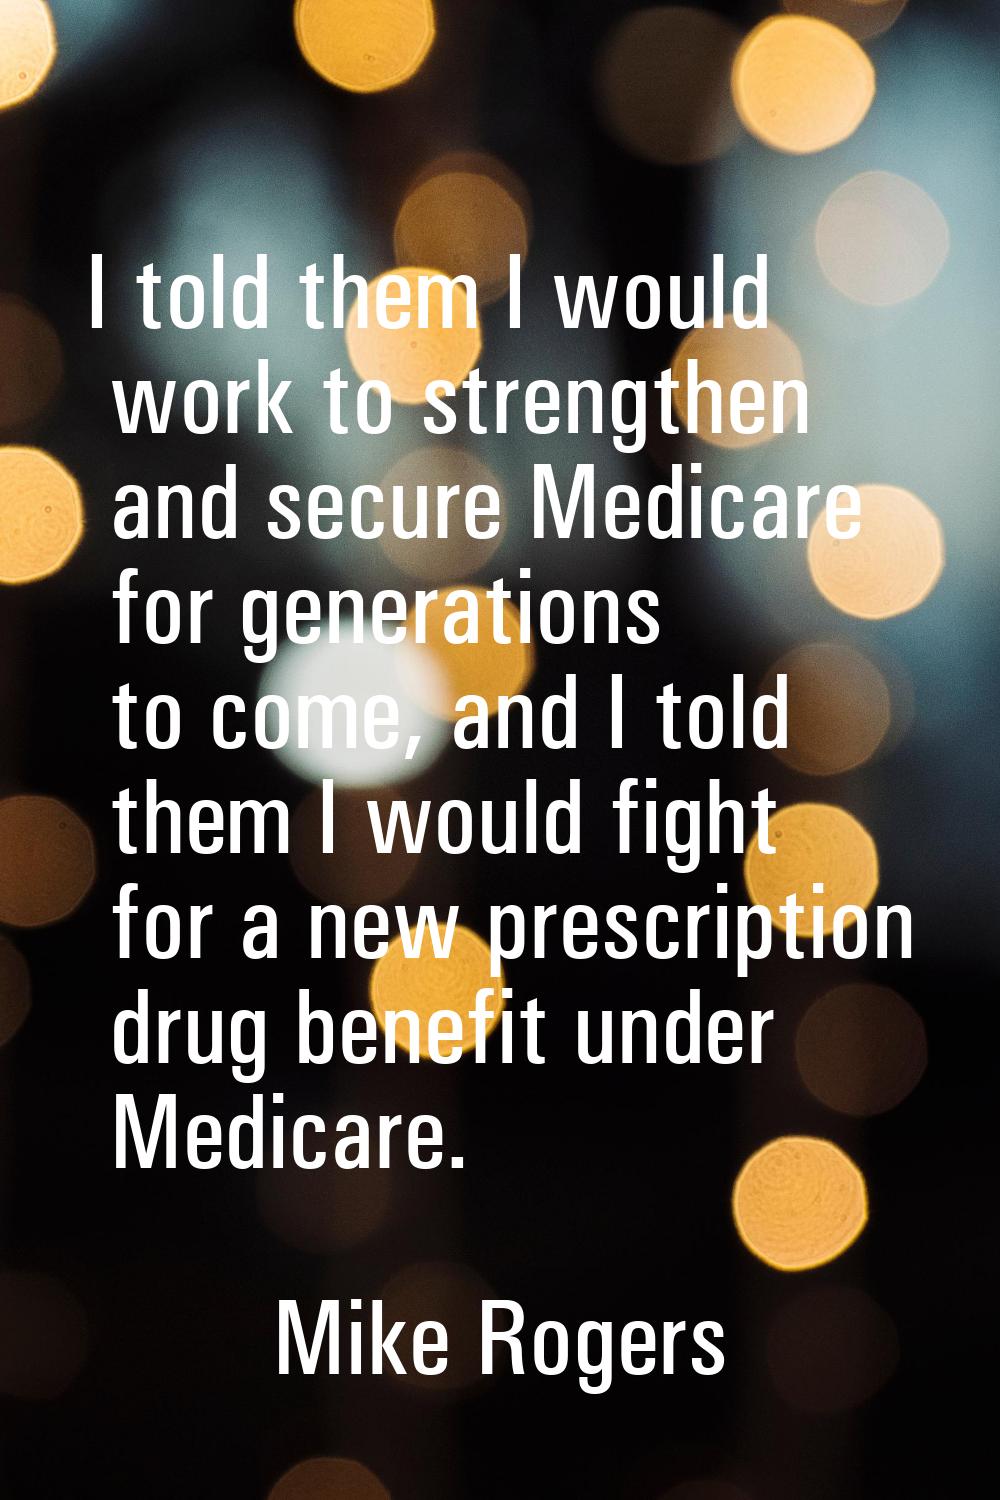 I told them I would work to strengthen and secure Medicare for generations to come, and I told them